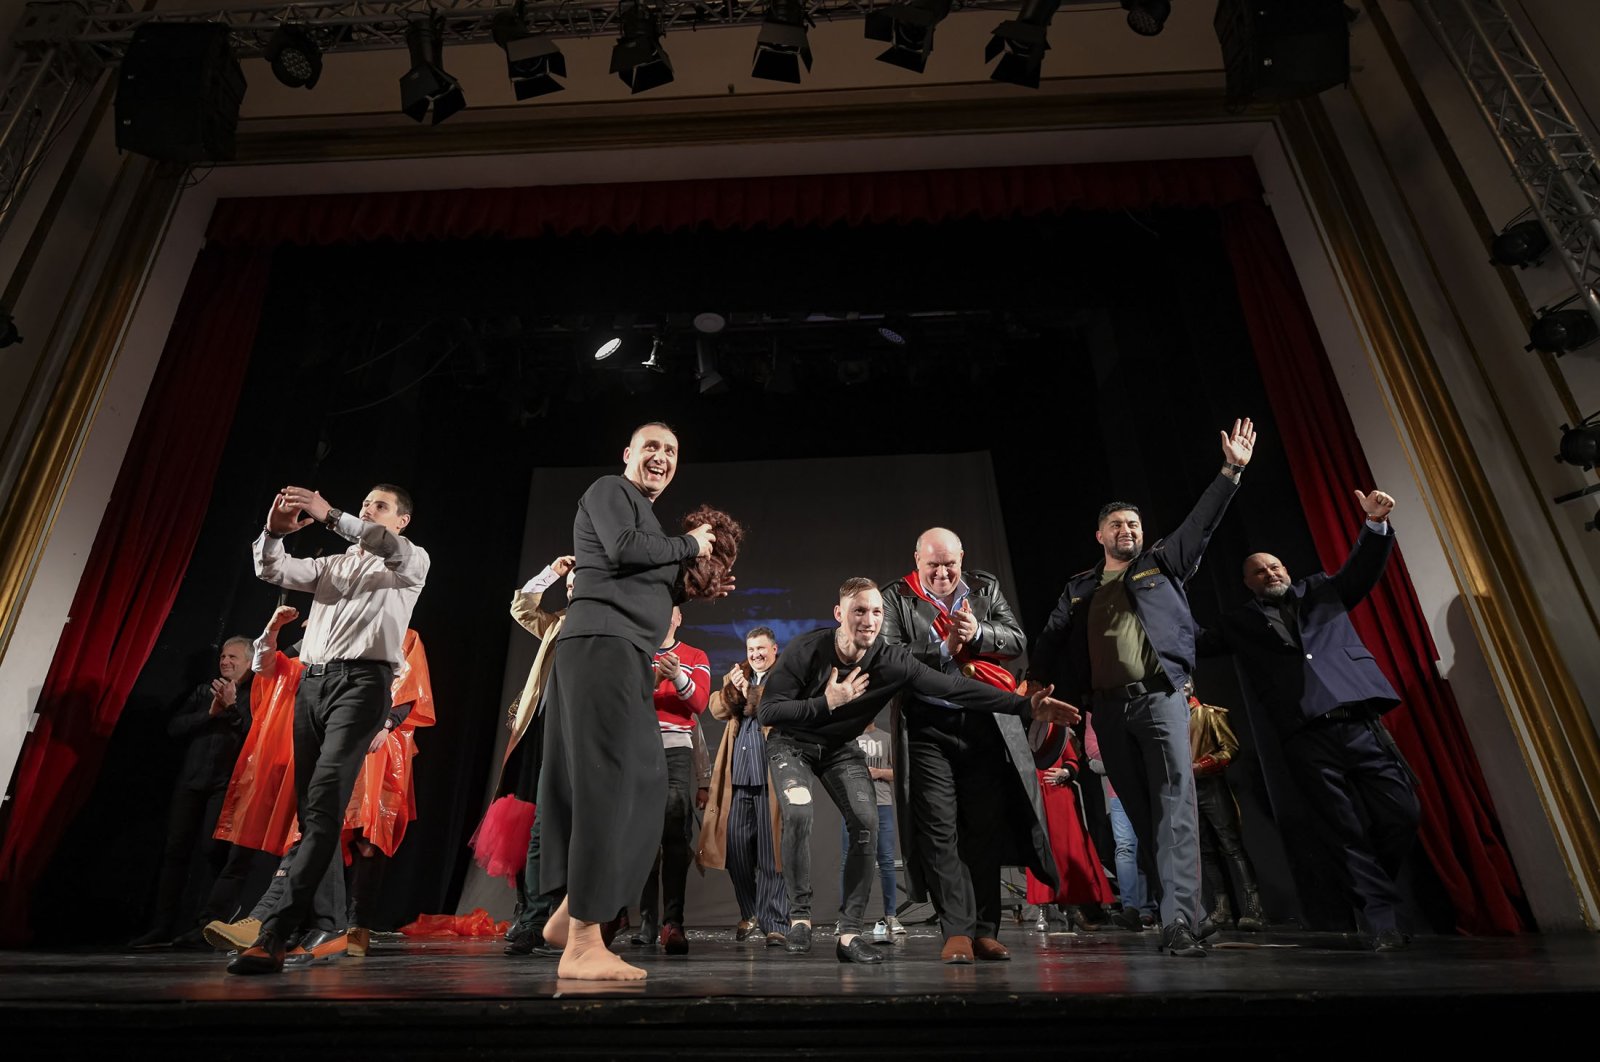 Inmates salute the public after performing in the “State of Siege,” by French author Albert Camus, a play describing a totalitarian Spanish regime during the plague, at the Nottara Theater in Bucharest, Romania, Nov. 24, 2021. (AP Photo)